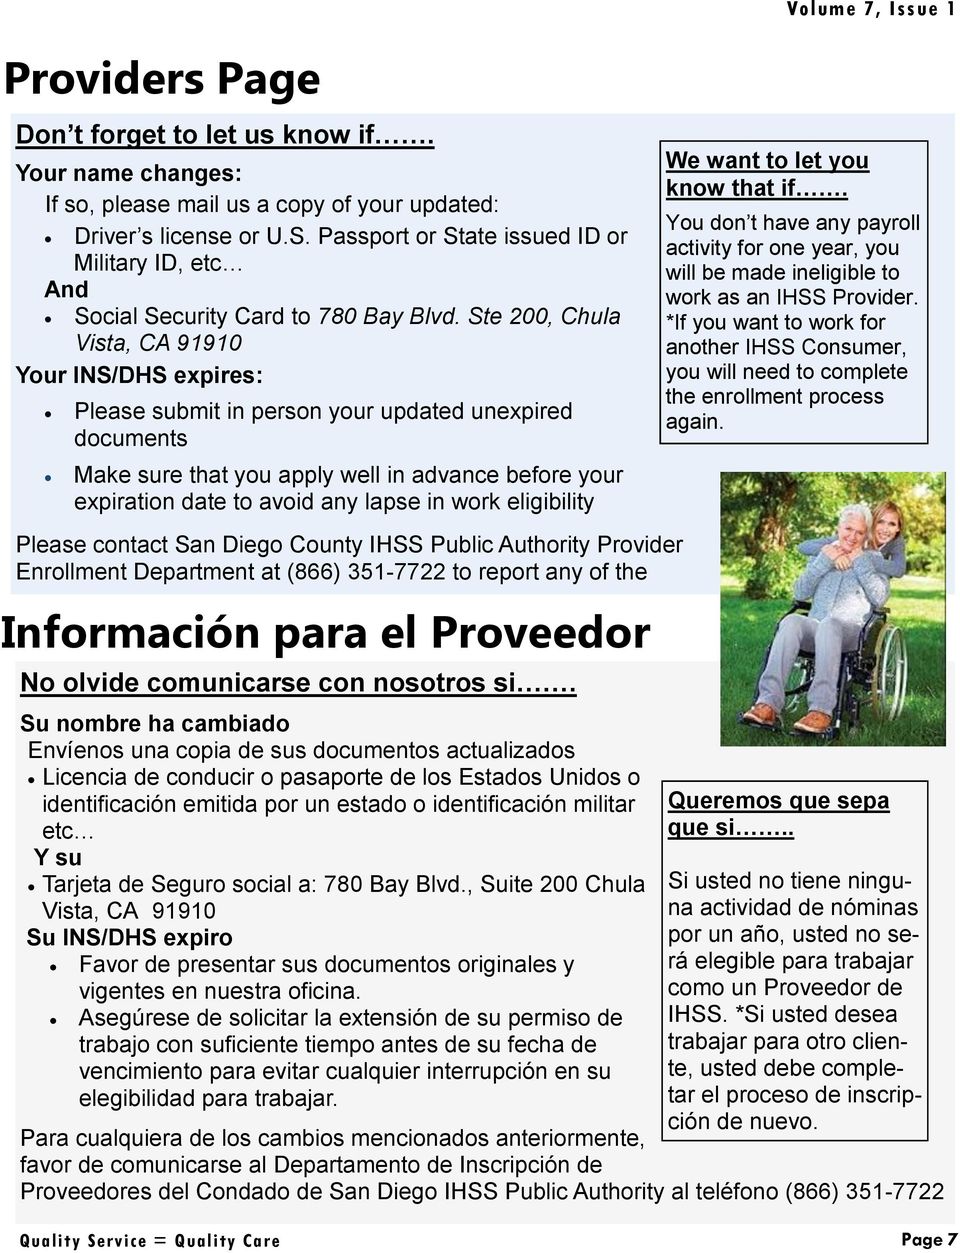 Ste 200, Chula Vista, CA 91910 Your INS/DHS expires: Please submit in person your updated unexpired documents Make sure that you apply well in advance before your expiration date to avoid any lapse